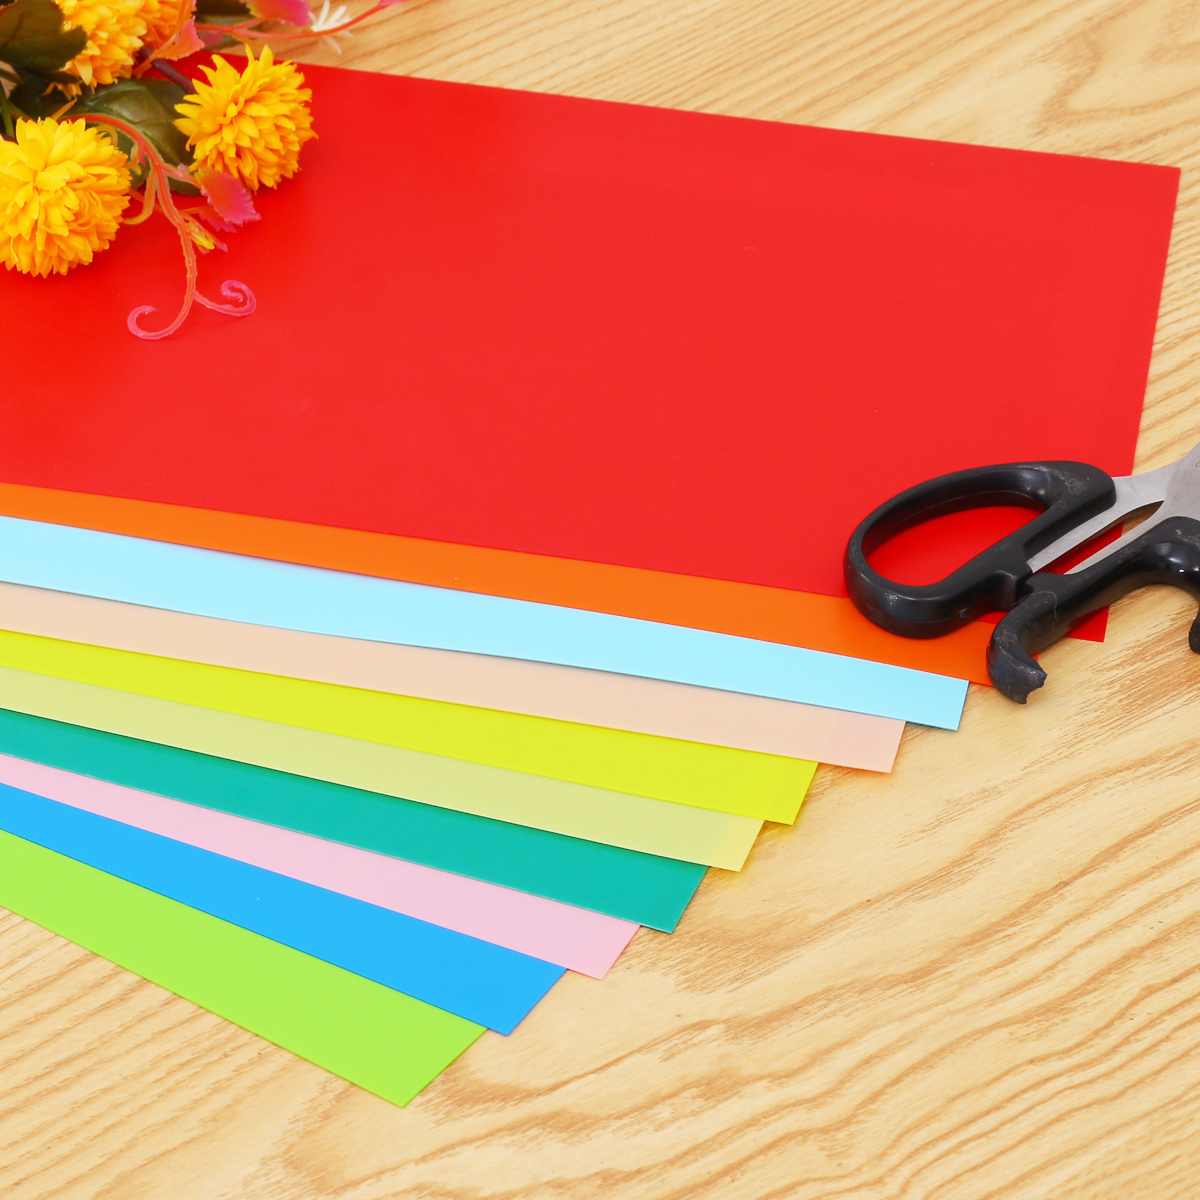 1Set New Heat Shrink Plastic Sheet Kit Shrinky Paper Hole Punch for Key Chains Jewelry Buttons Gift Tags Bookmarks DIY Making